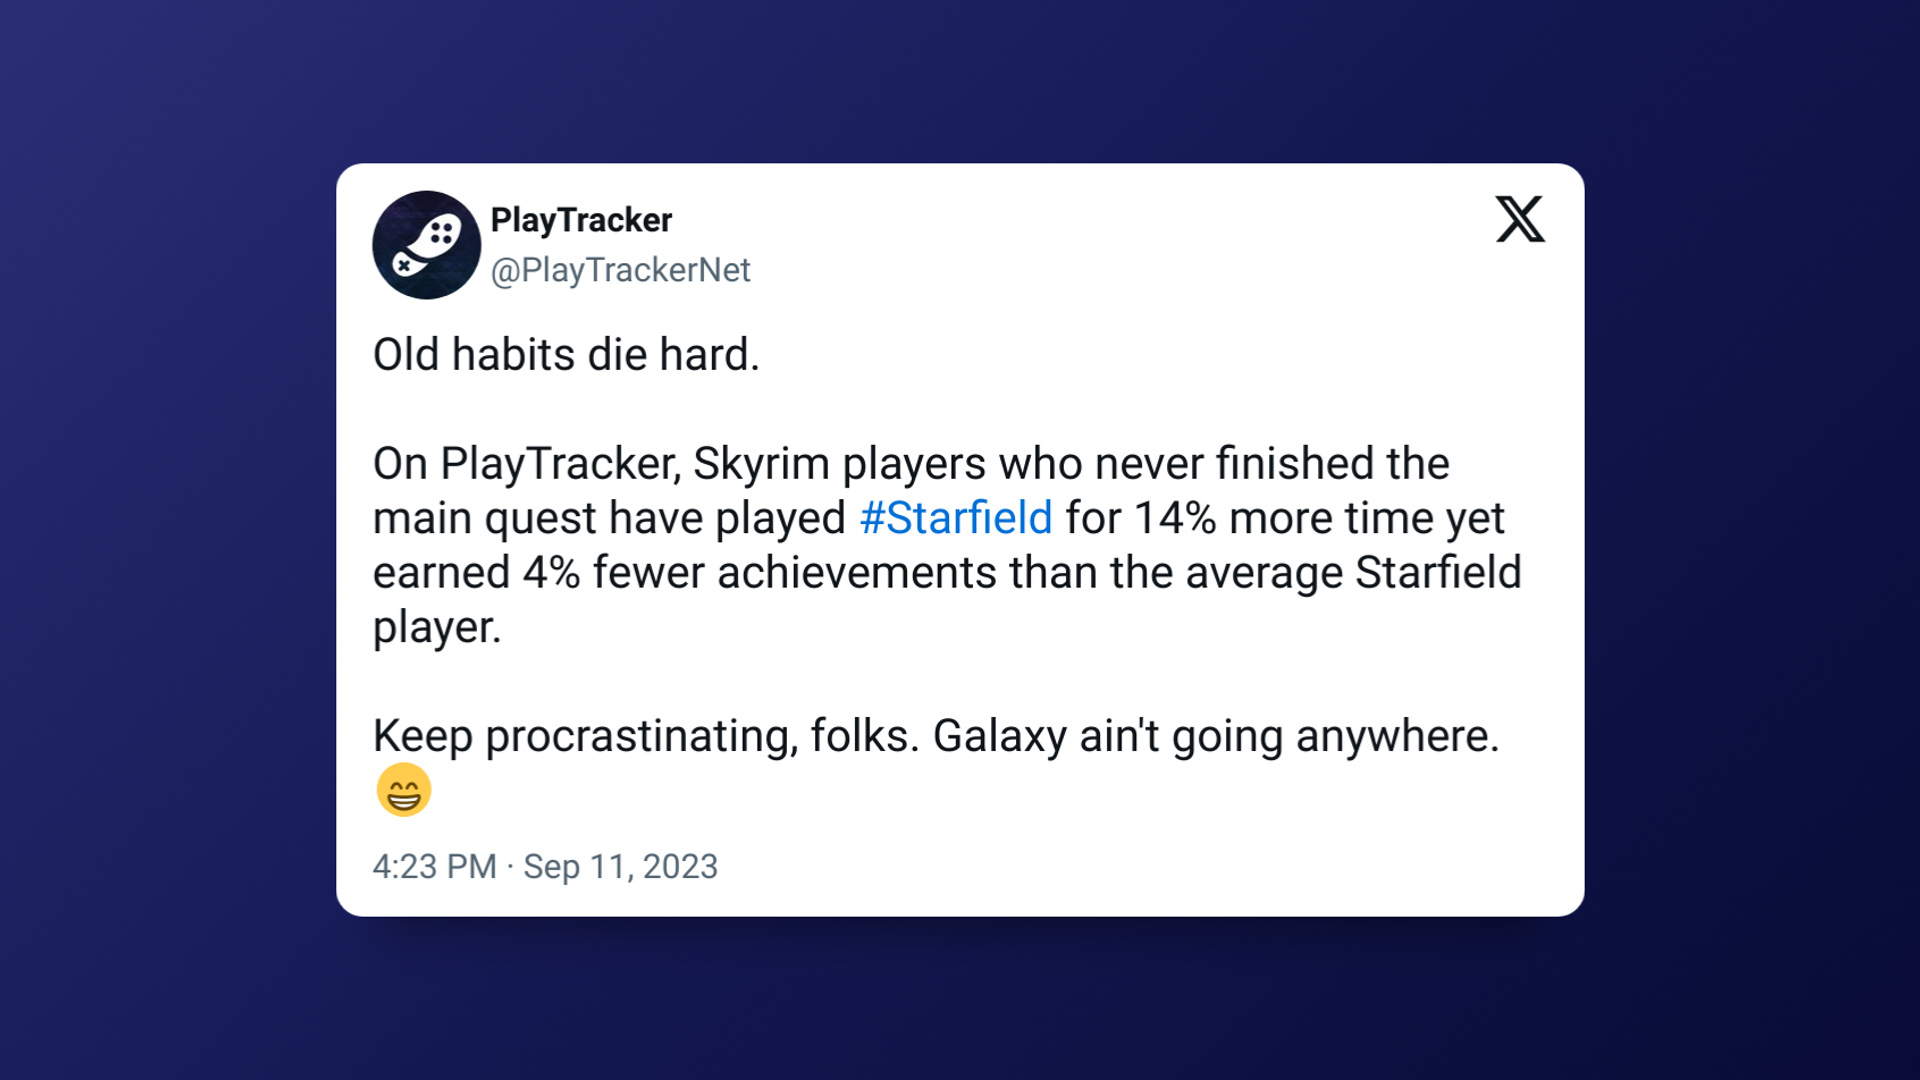 PlayTracker post on Twitter describing how former Skyrim players are getting fewer achievements in Starfield, too